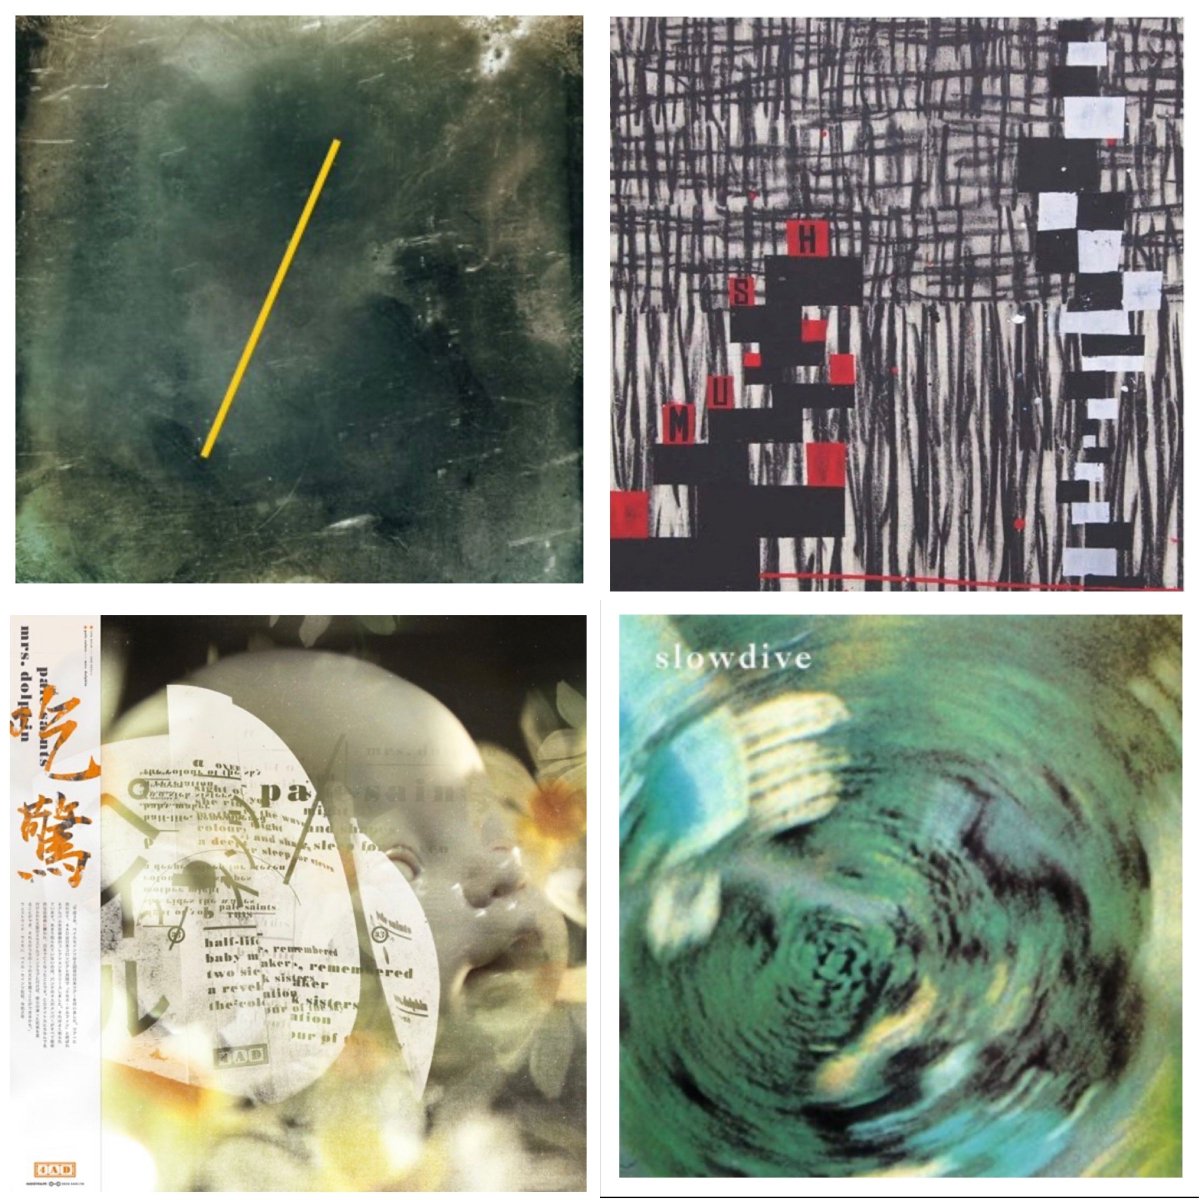 #recordstoreday2020 is here at last. Here at the Static Sounds Clubhouse we are excited about @MUSHband @throwingmuses @slowdiveband and @palesaints. What have you bought or going to buy today?